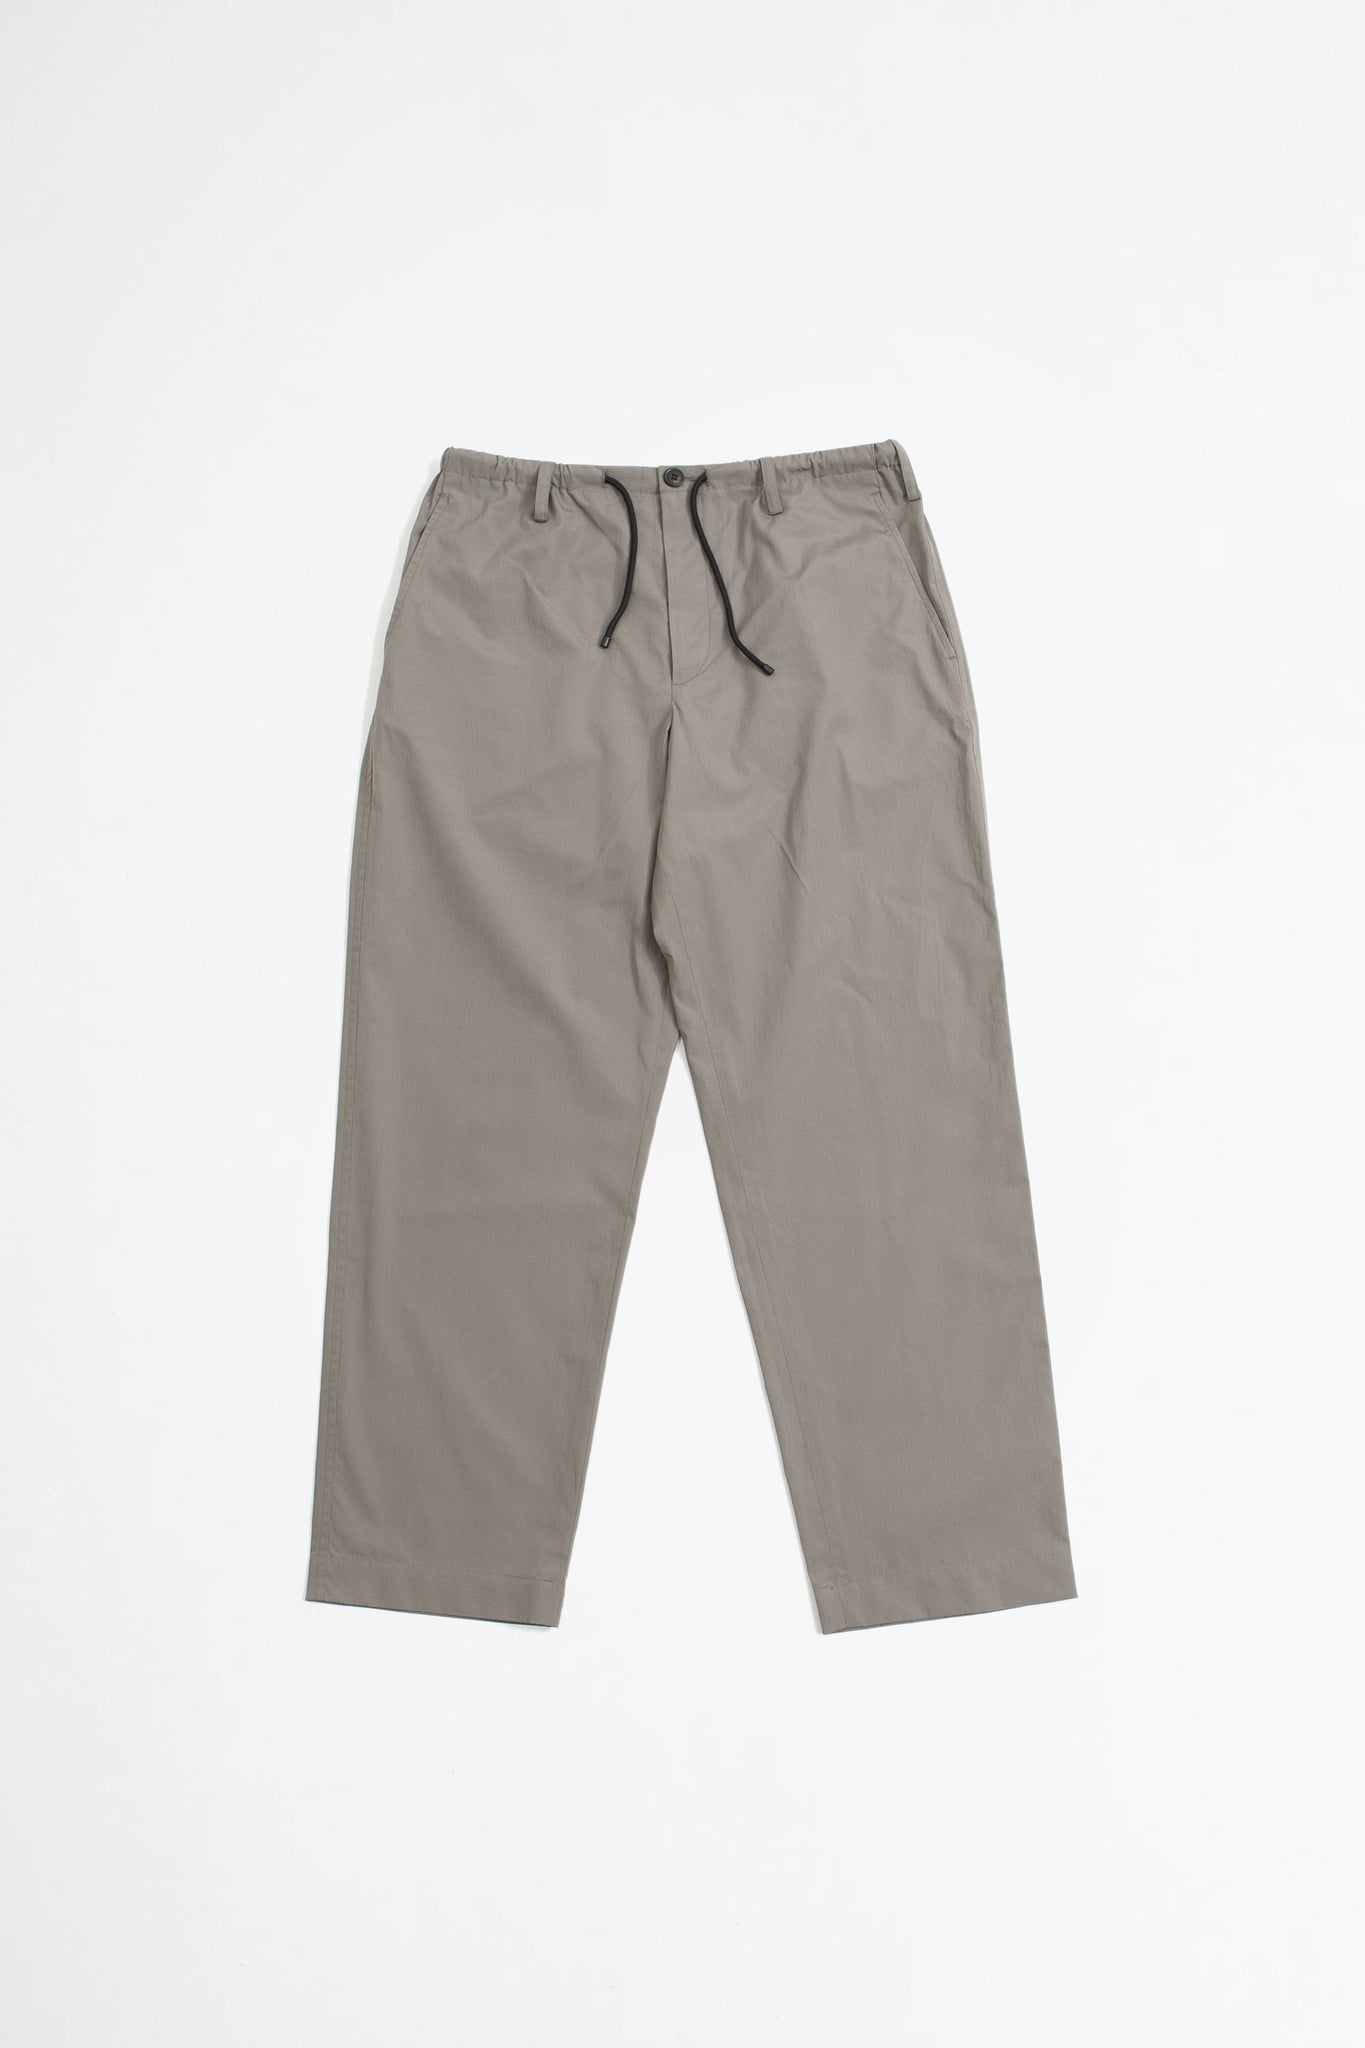 Trousers – SPORTIVO STORE